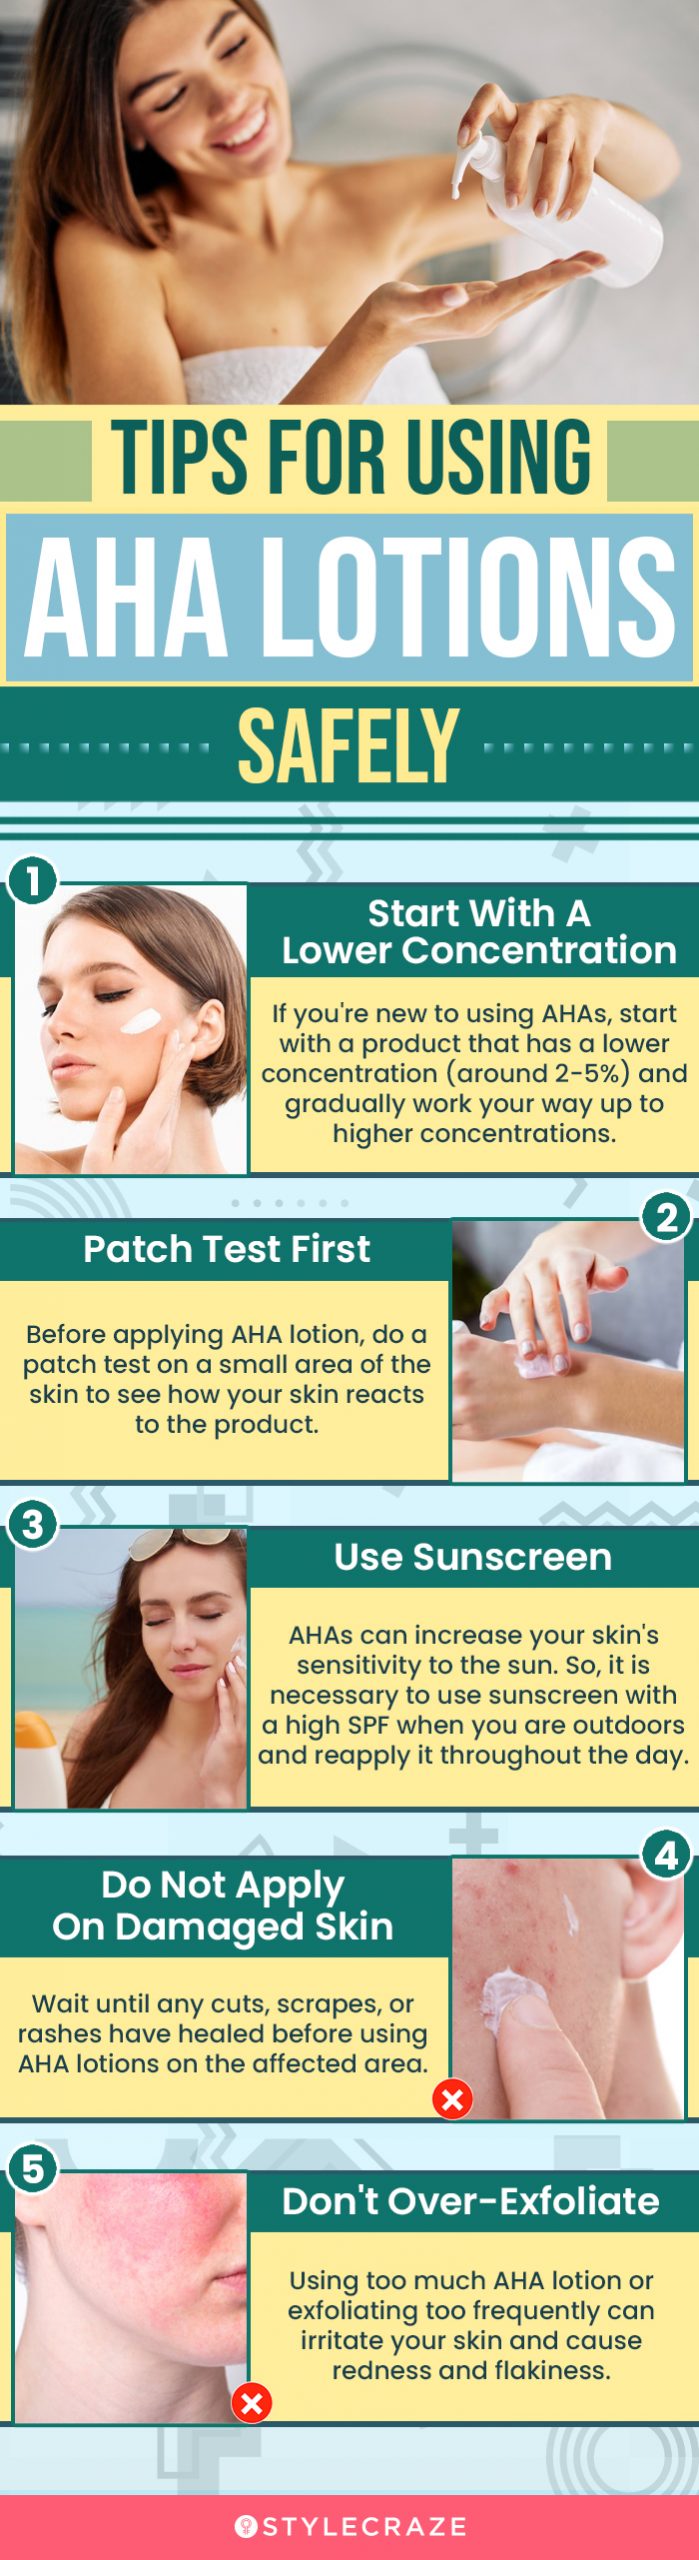 Tips for Using AHA Lotions Safely (infographic)